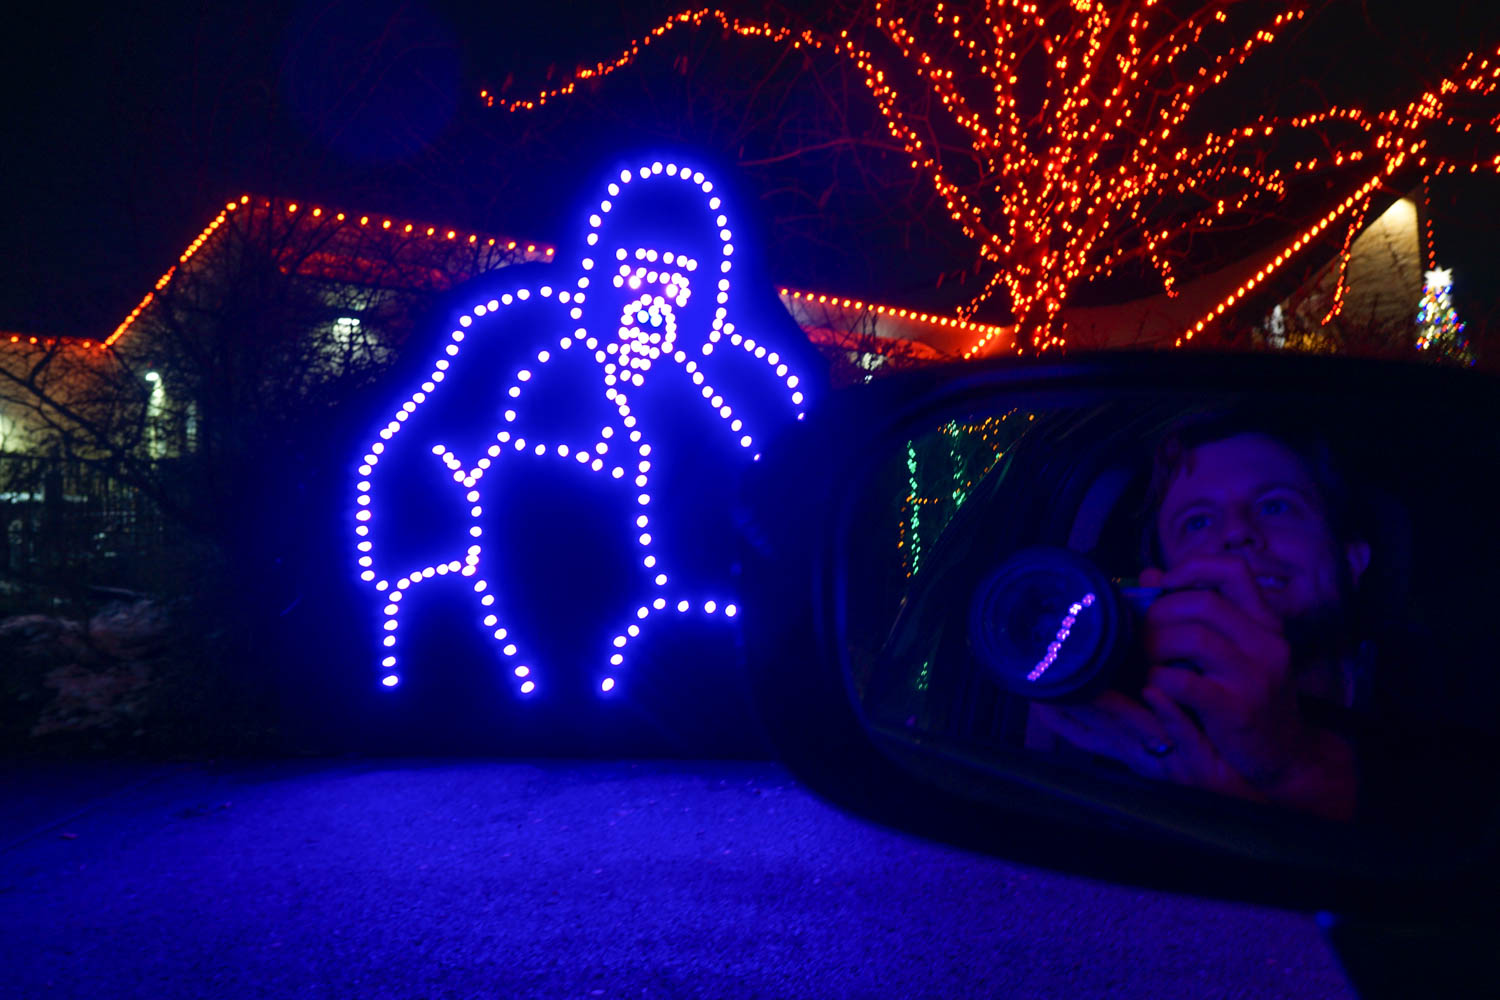 Gorilla at the Pittsburgh Zoo Light Drive Through